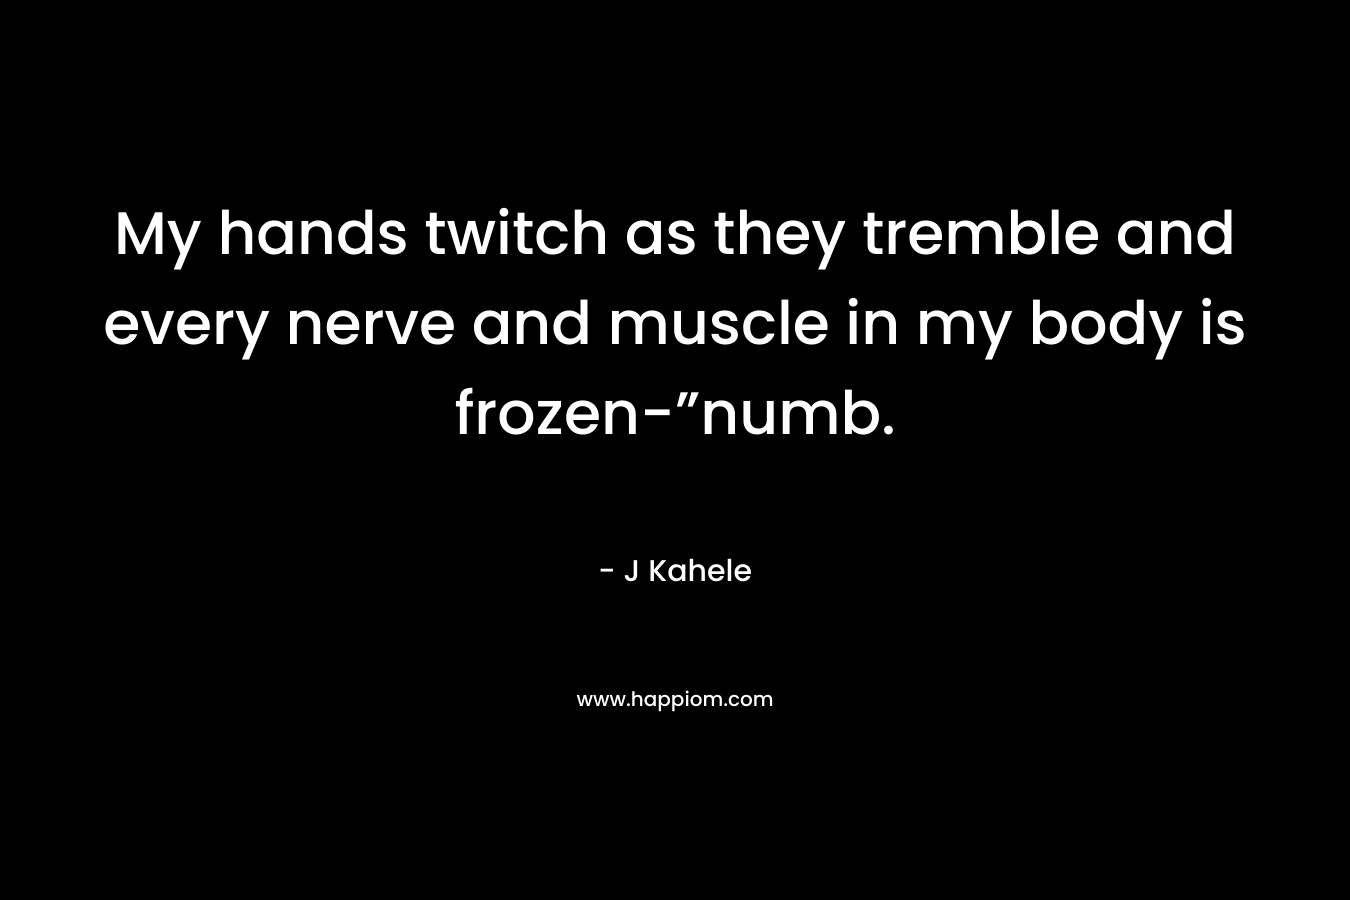 My hands twitch as they tremble and every nerve and muscle in my body is frozen-”numb. – J Kahele